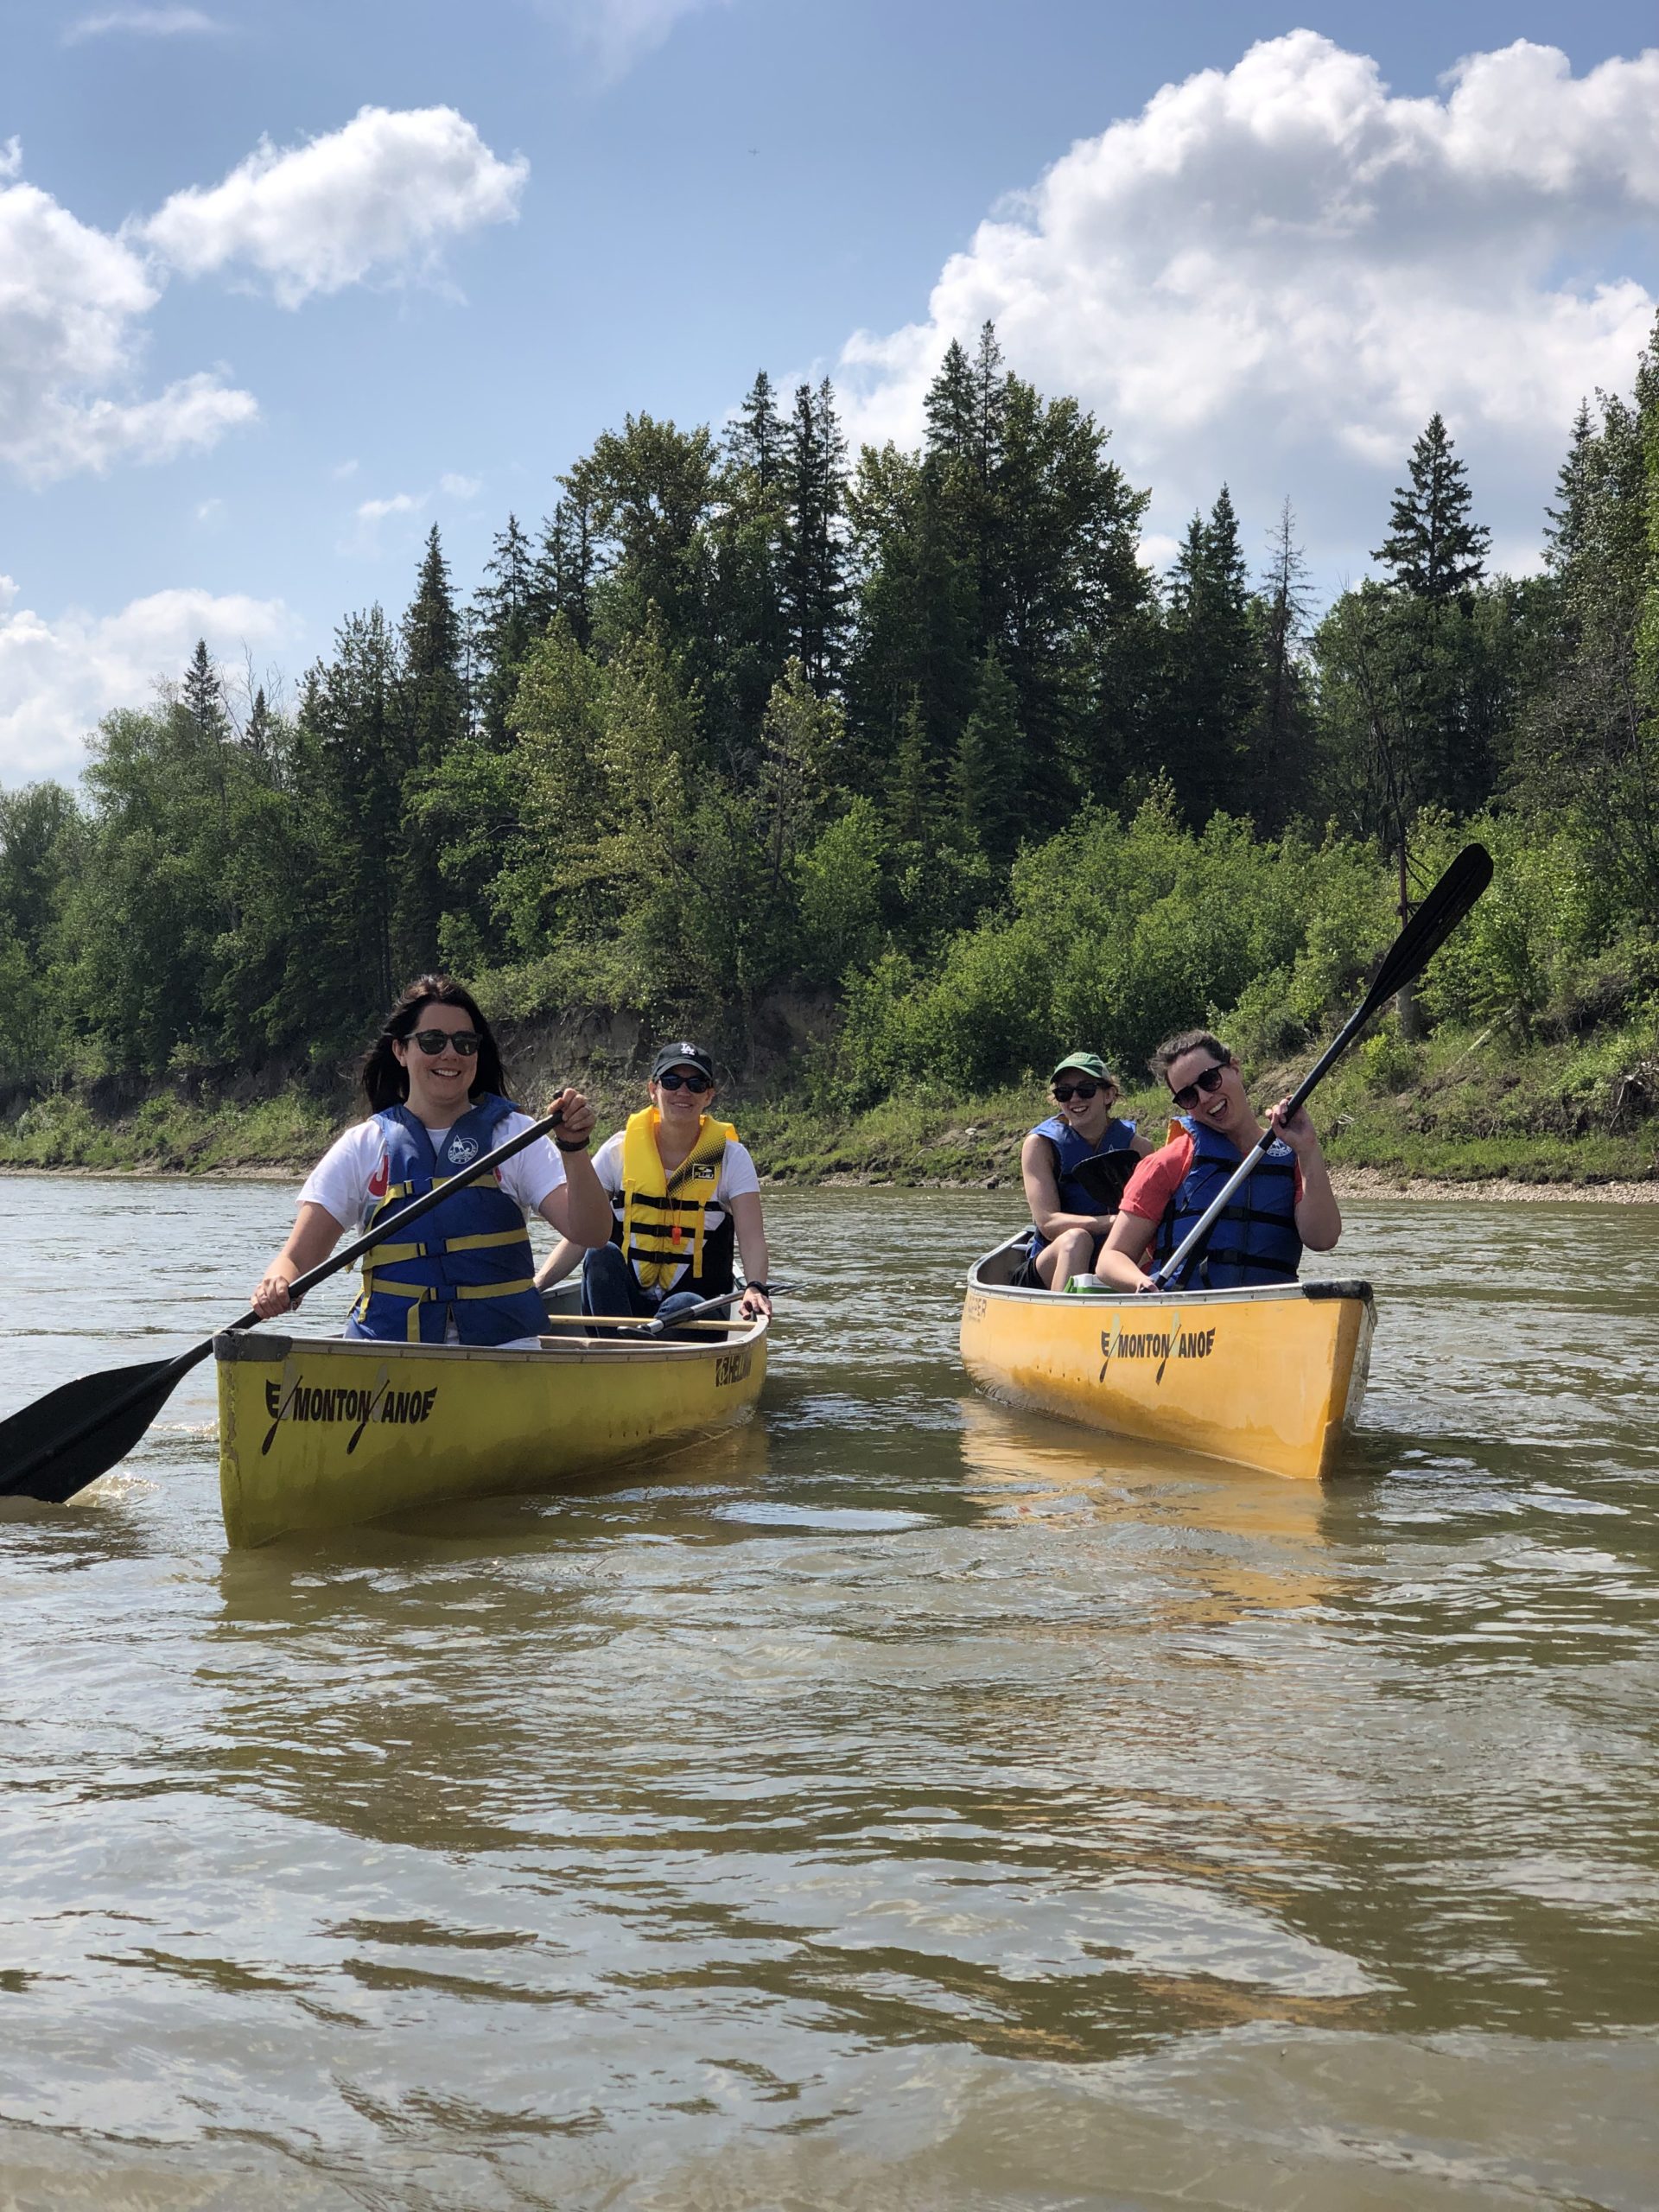 The Kick Point team canoeing down the North Saskatchewan River, four team members split evenly between two yellow canoes